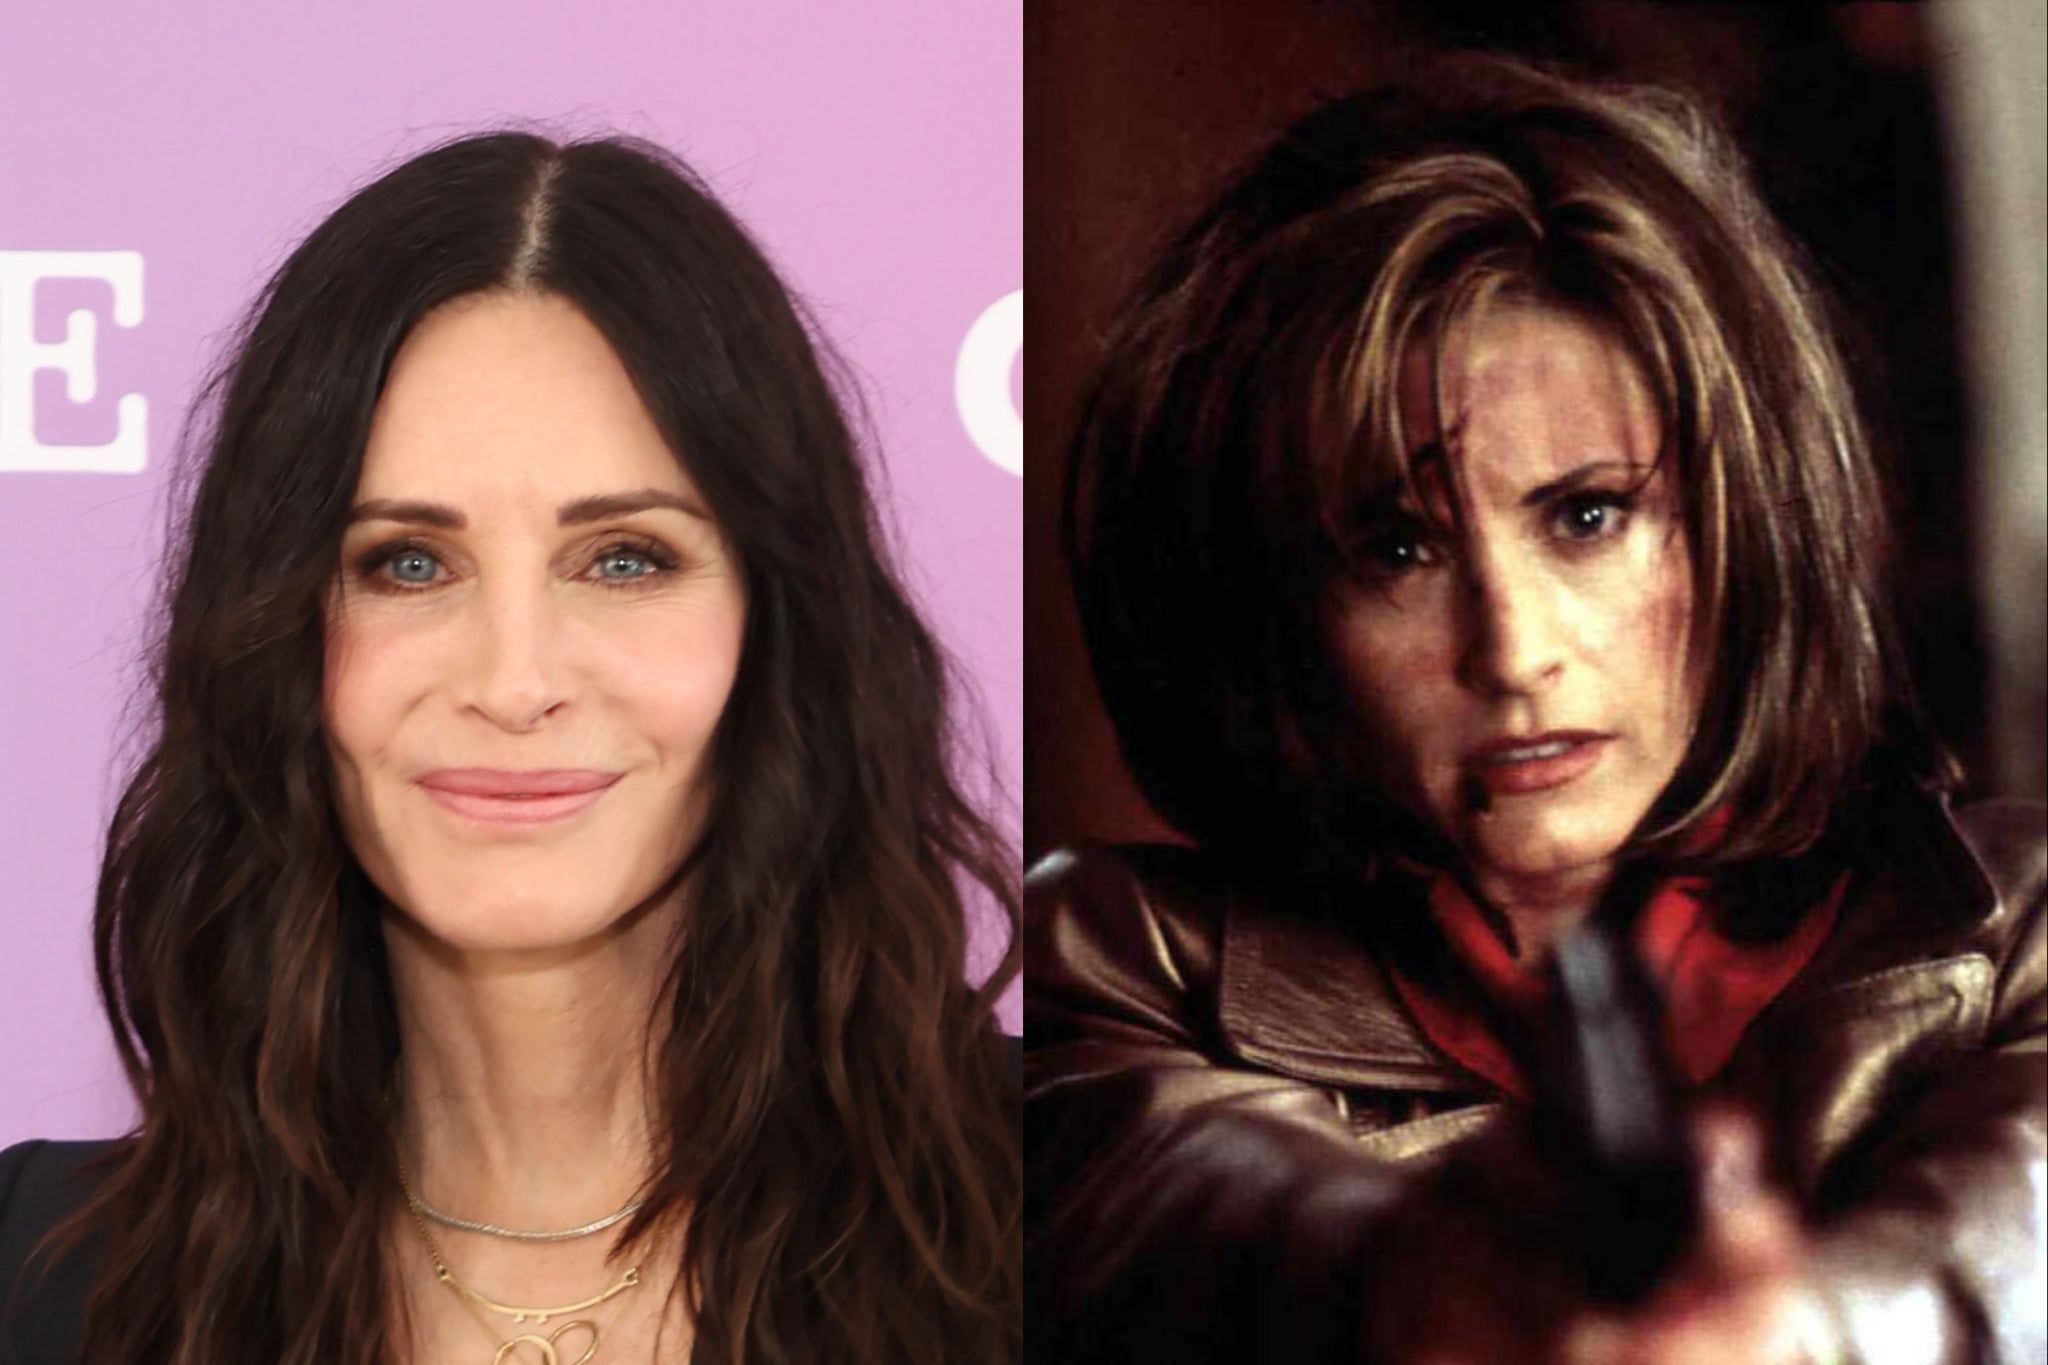 Courteney Cox has played Gale Weathers in the Scream films since 1996